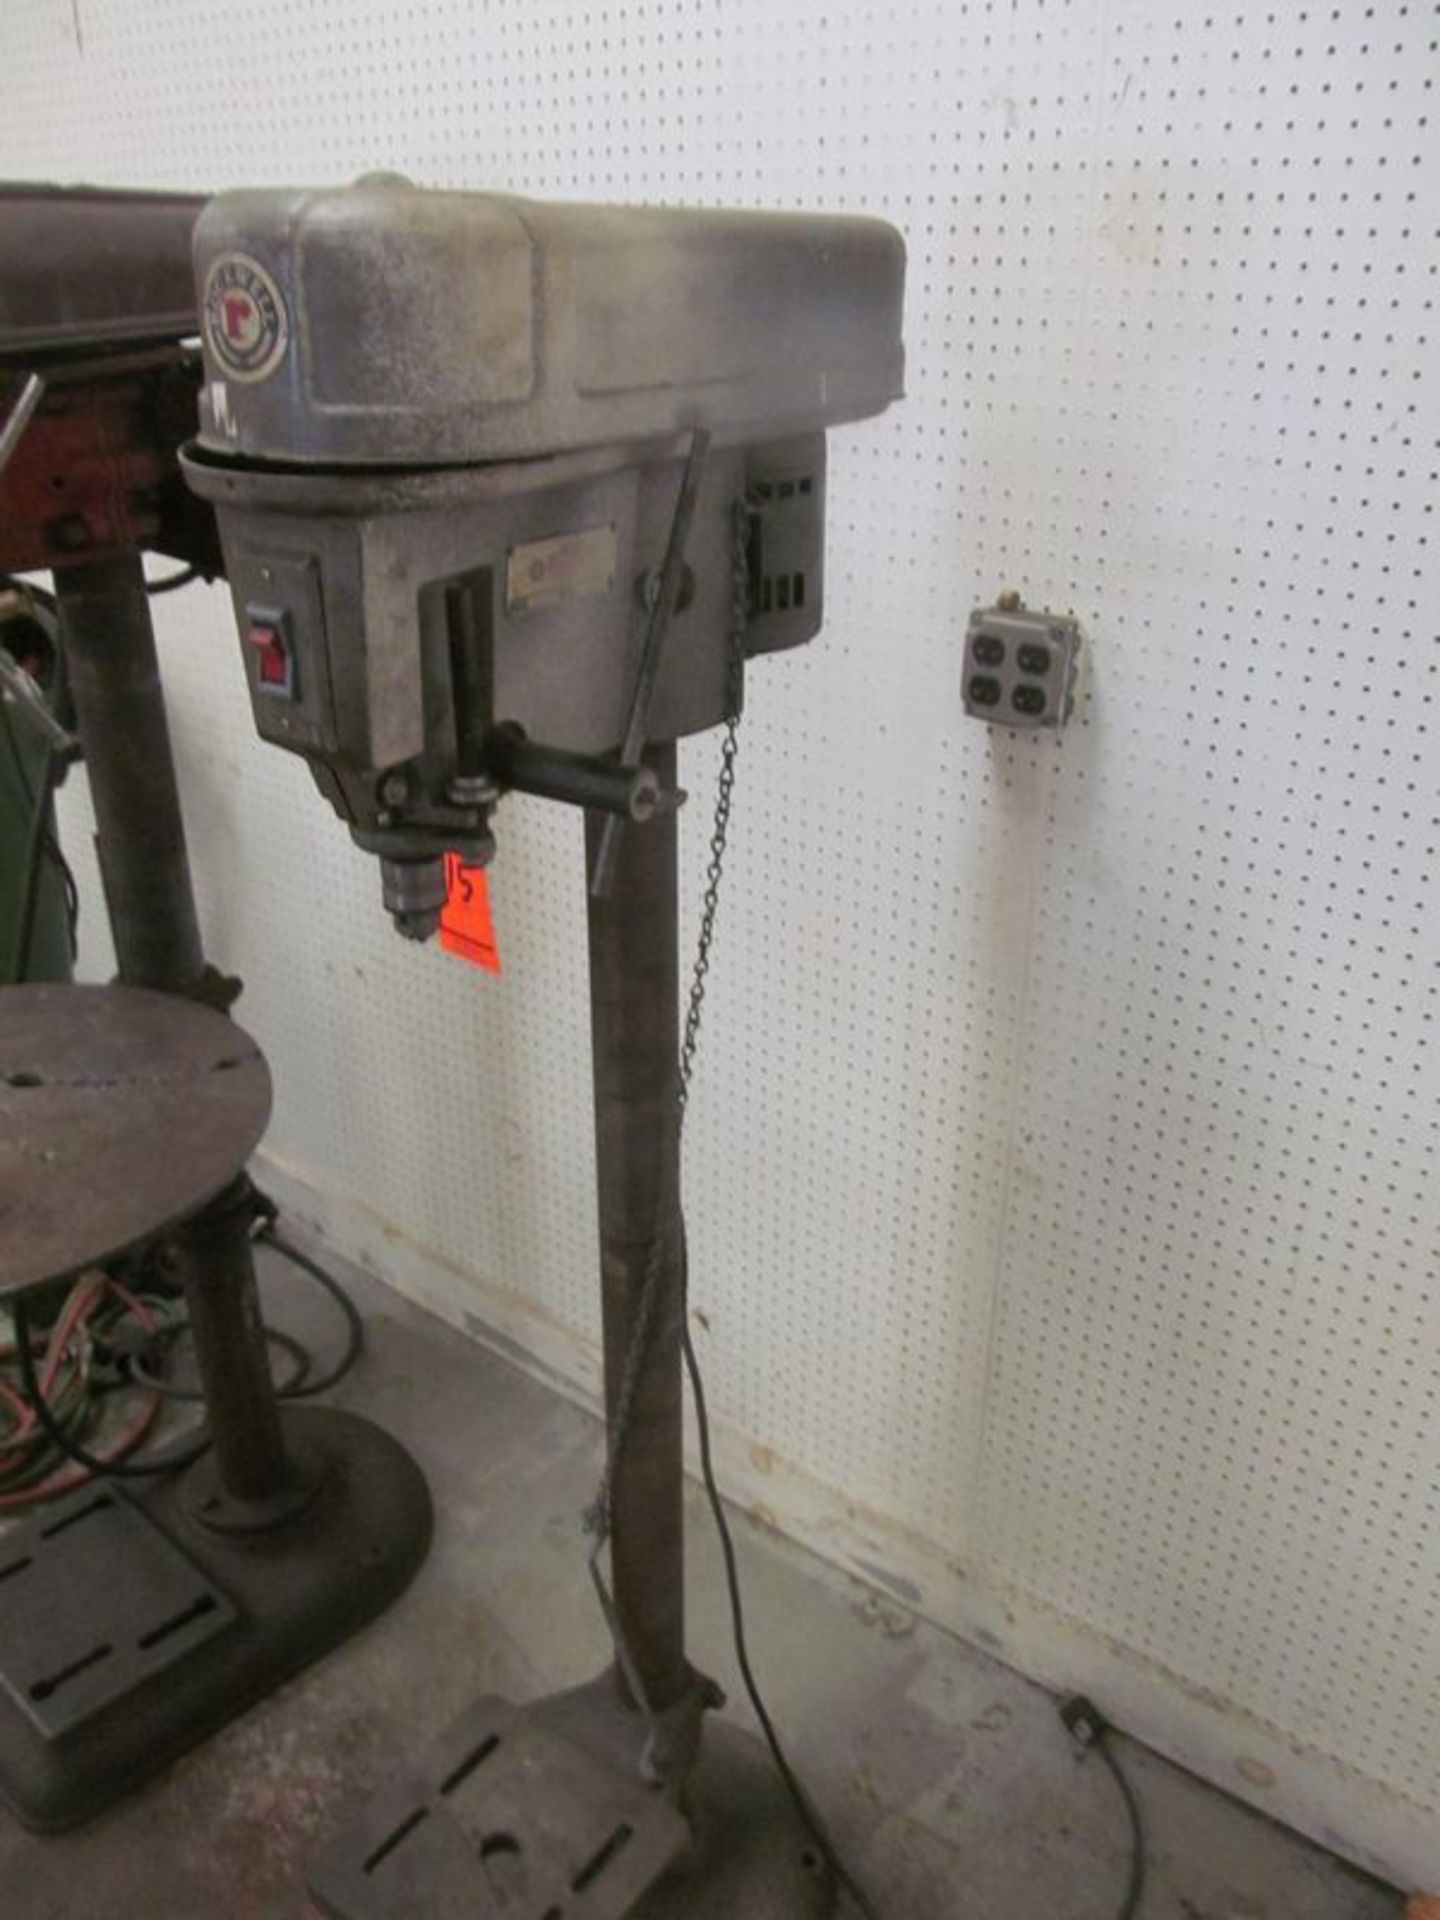 Rockwell 15" drill press, floor type, series 15-017, 1/2 HP, 1 PH, s/n 1595472 - Image 3 of 3